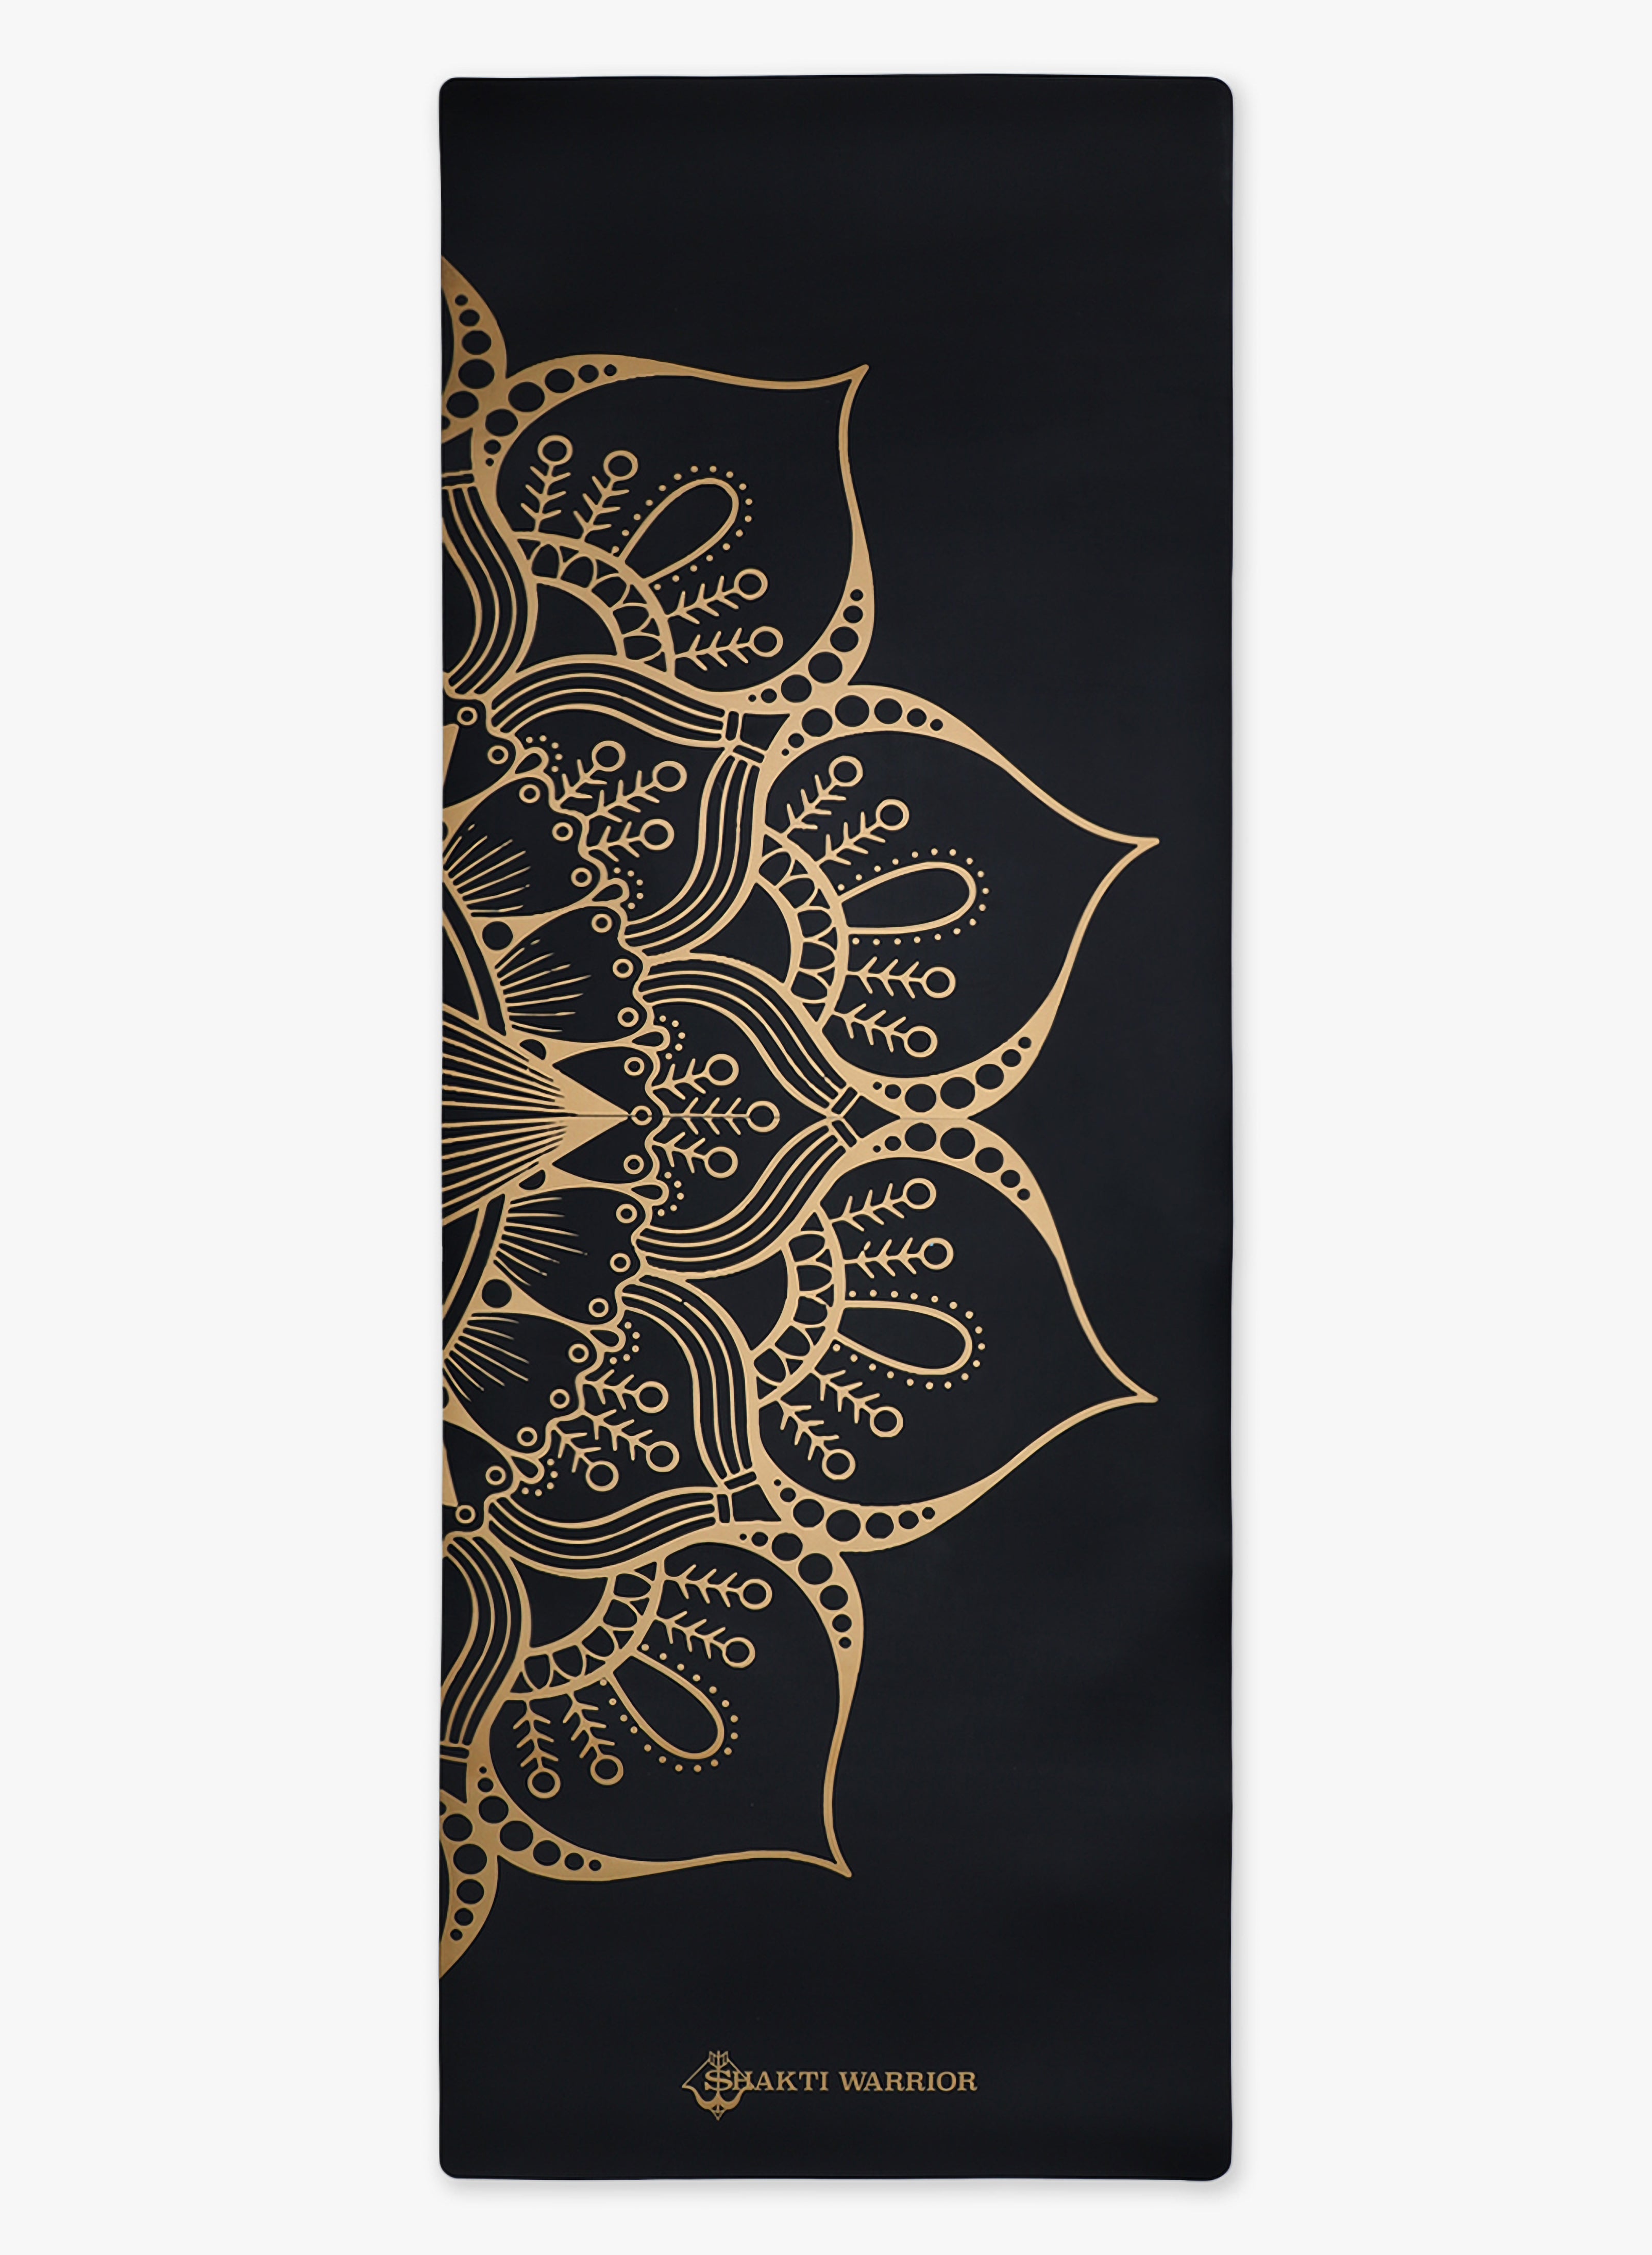 Shakti Warrior Black Lotus Recycled PU Yoga Mat - Enigmatic lotus design on black surface, wider dimension for enhanced stability. Eco-friendly, perfect for regular and hot yoga.